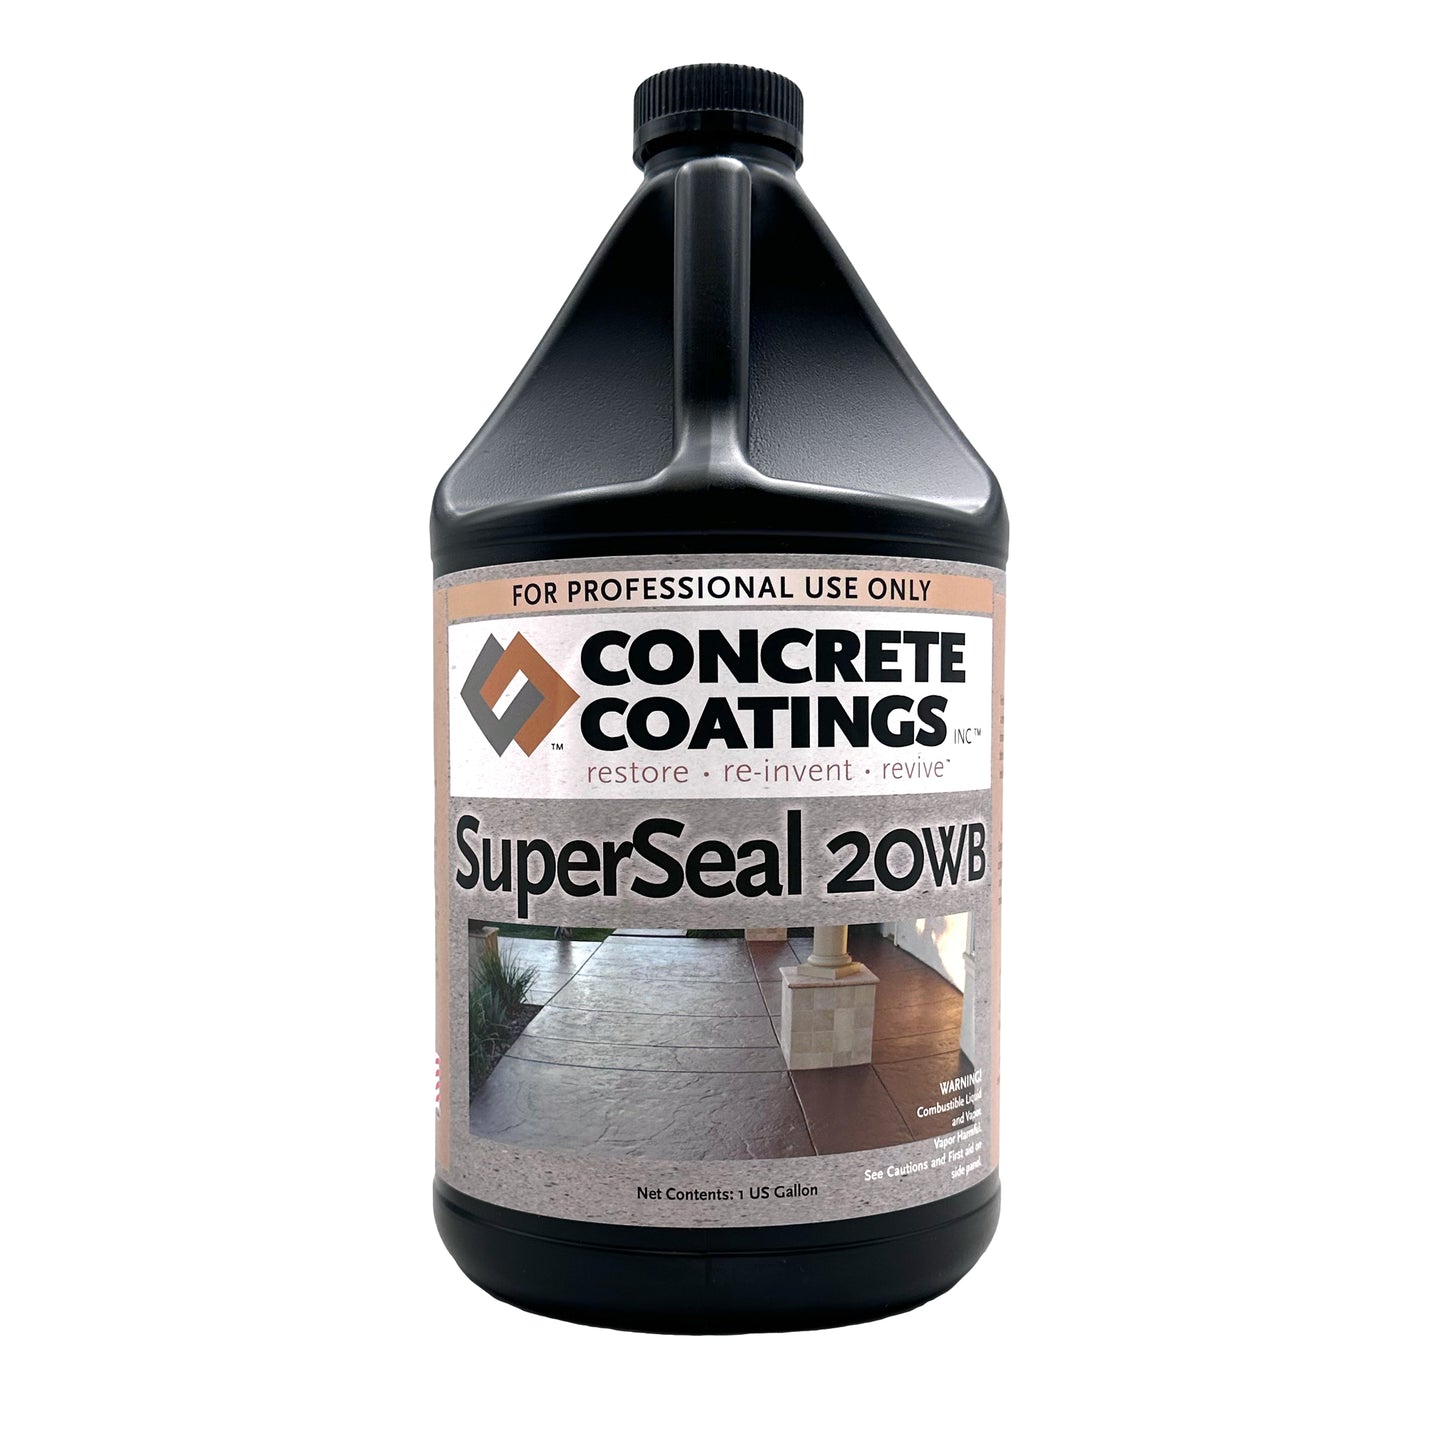 Concrete Coatings SuperSeal 20WB Water-Based Acrylic Sealer - Satin - 1 Gallon